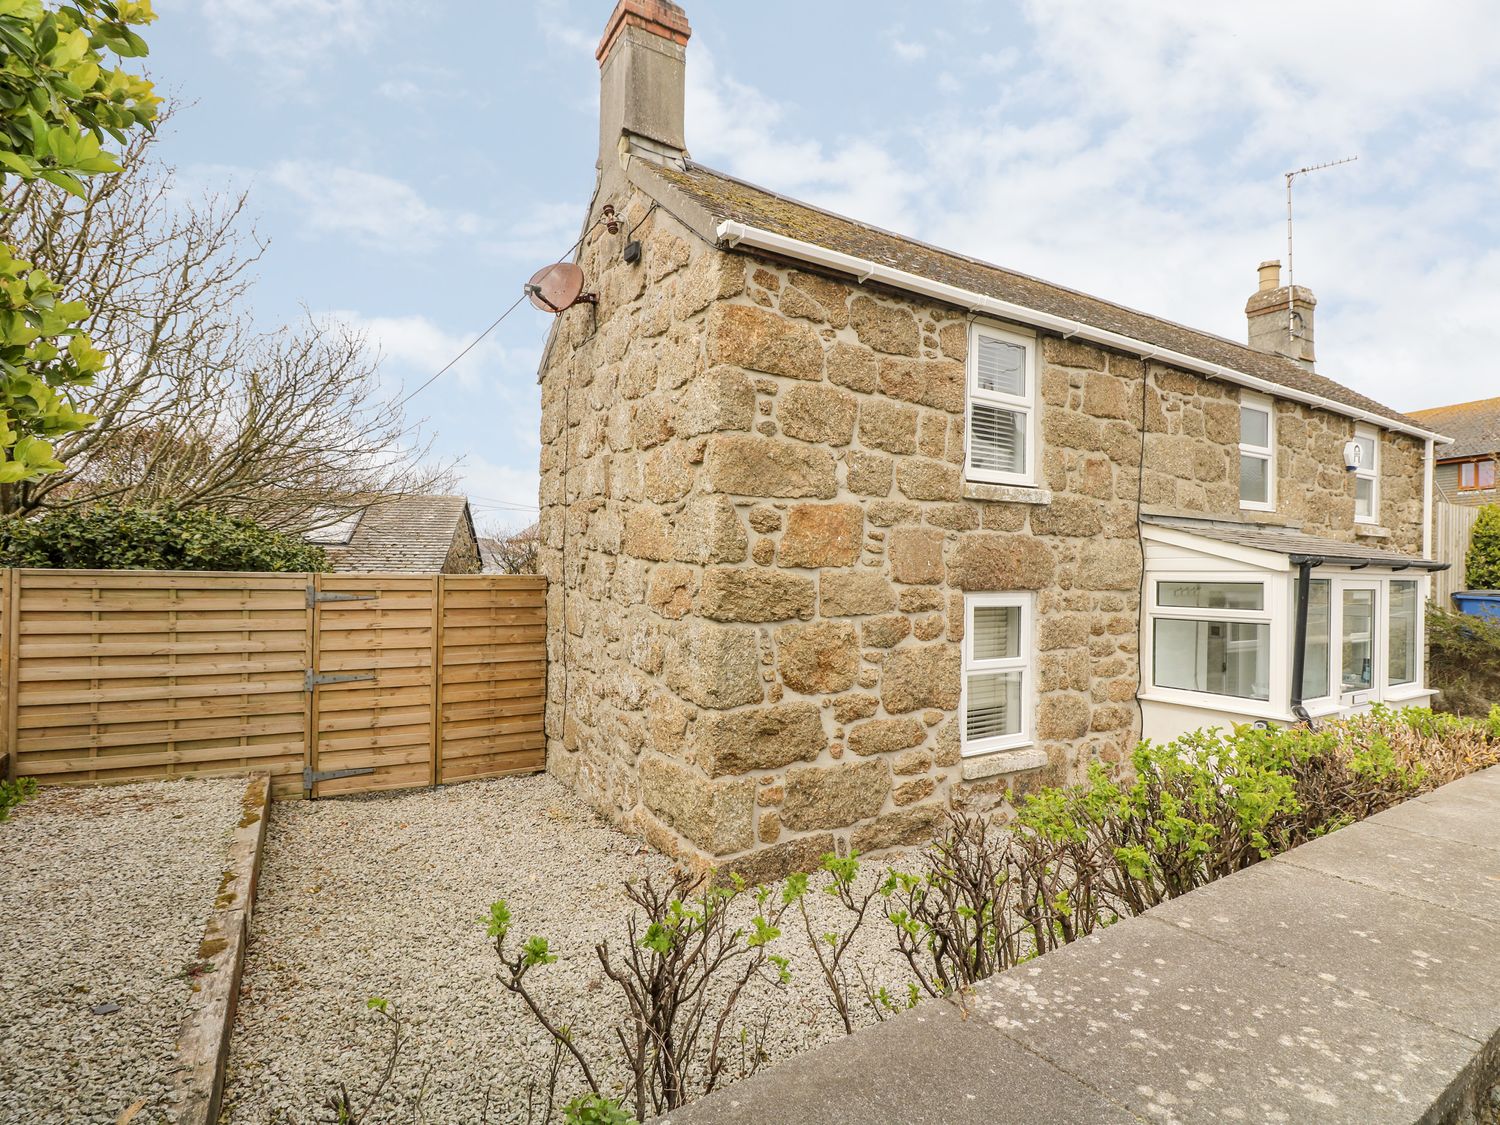 Forge Cottage - Cornwall - 959851 - photo 1